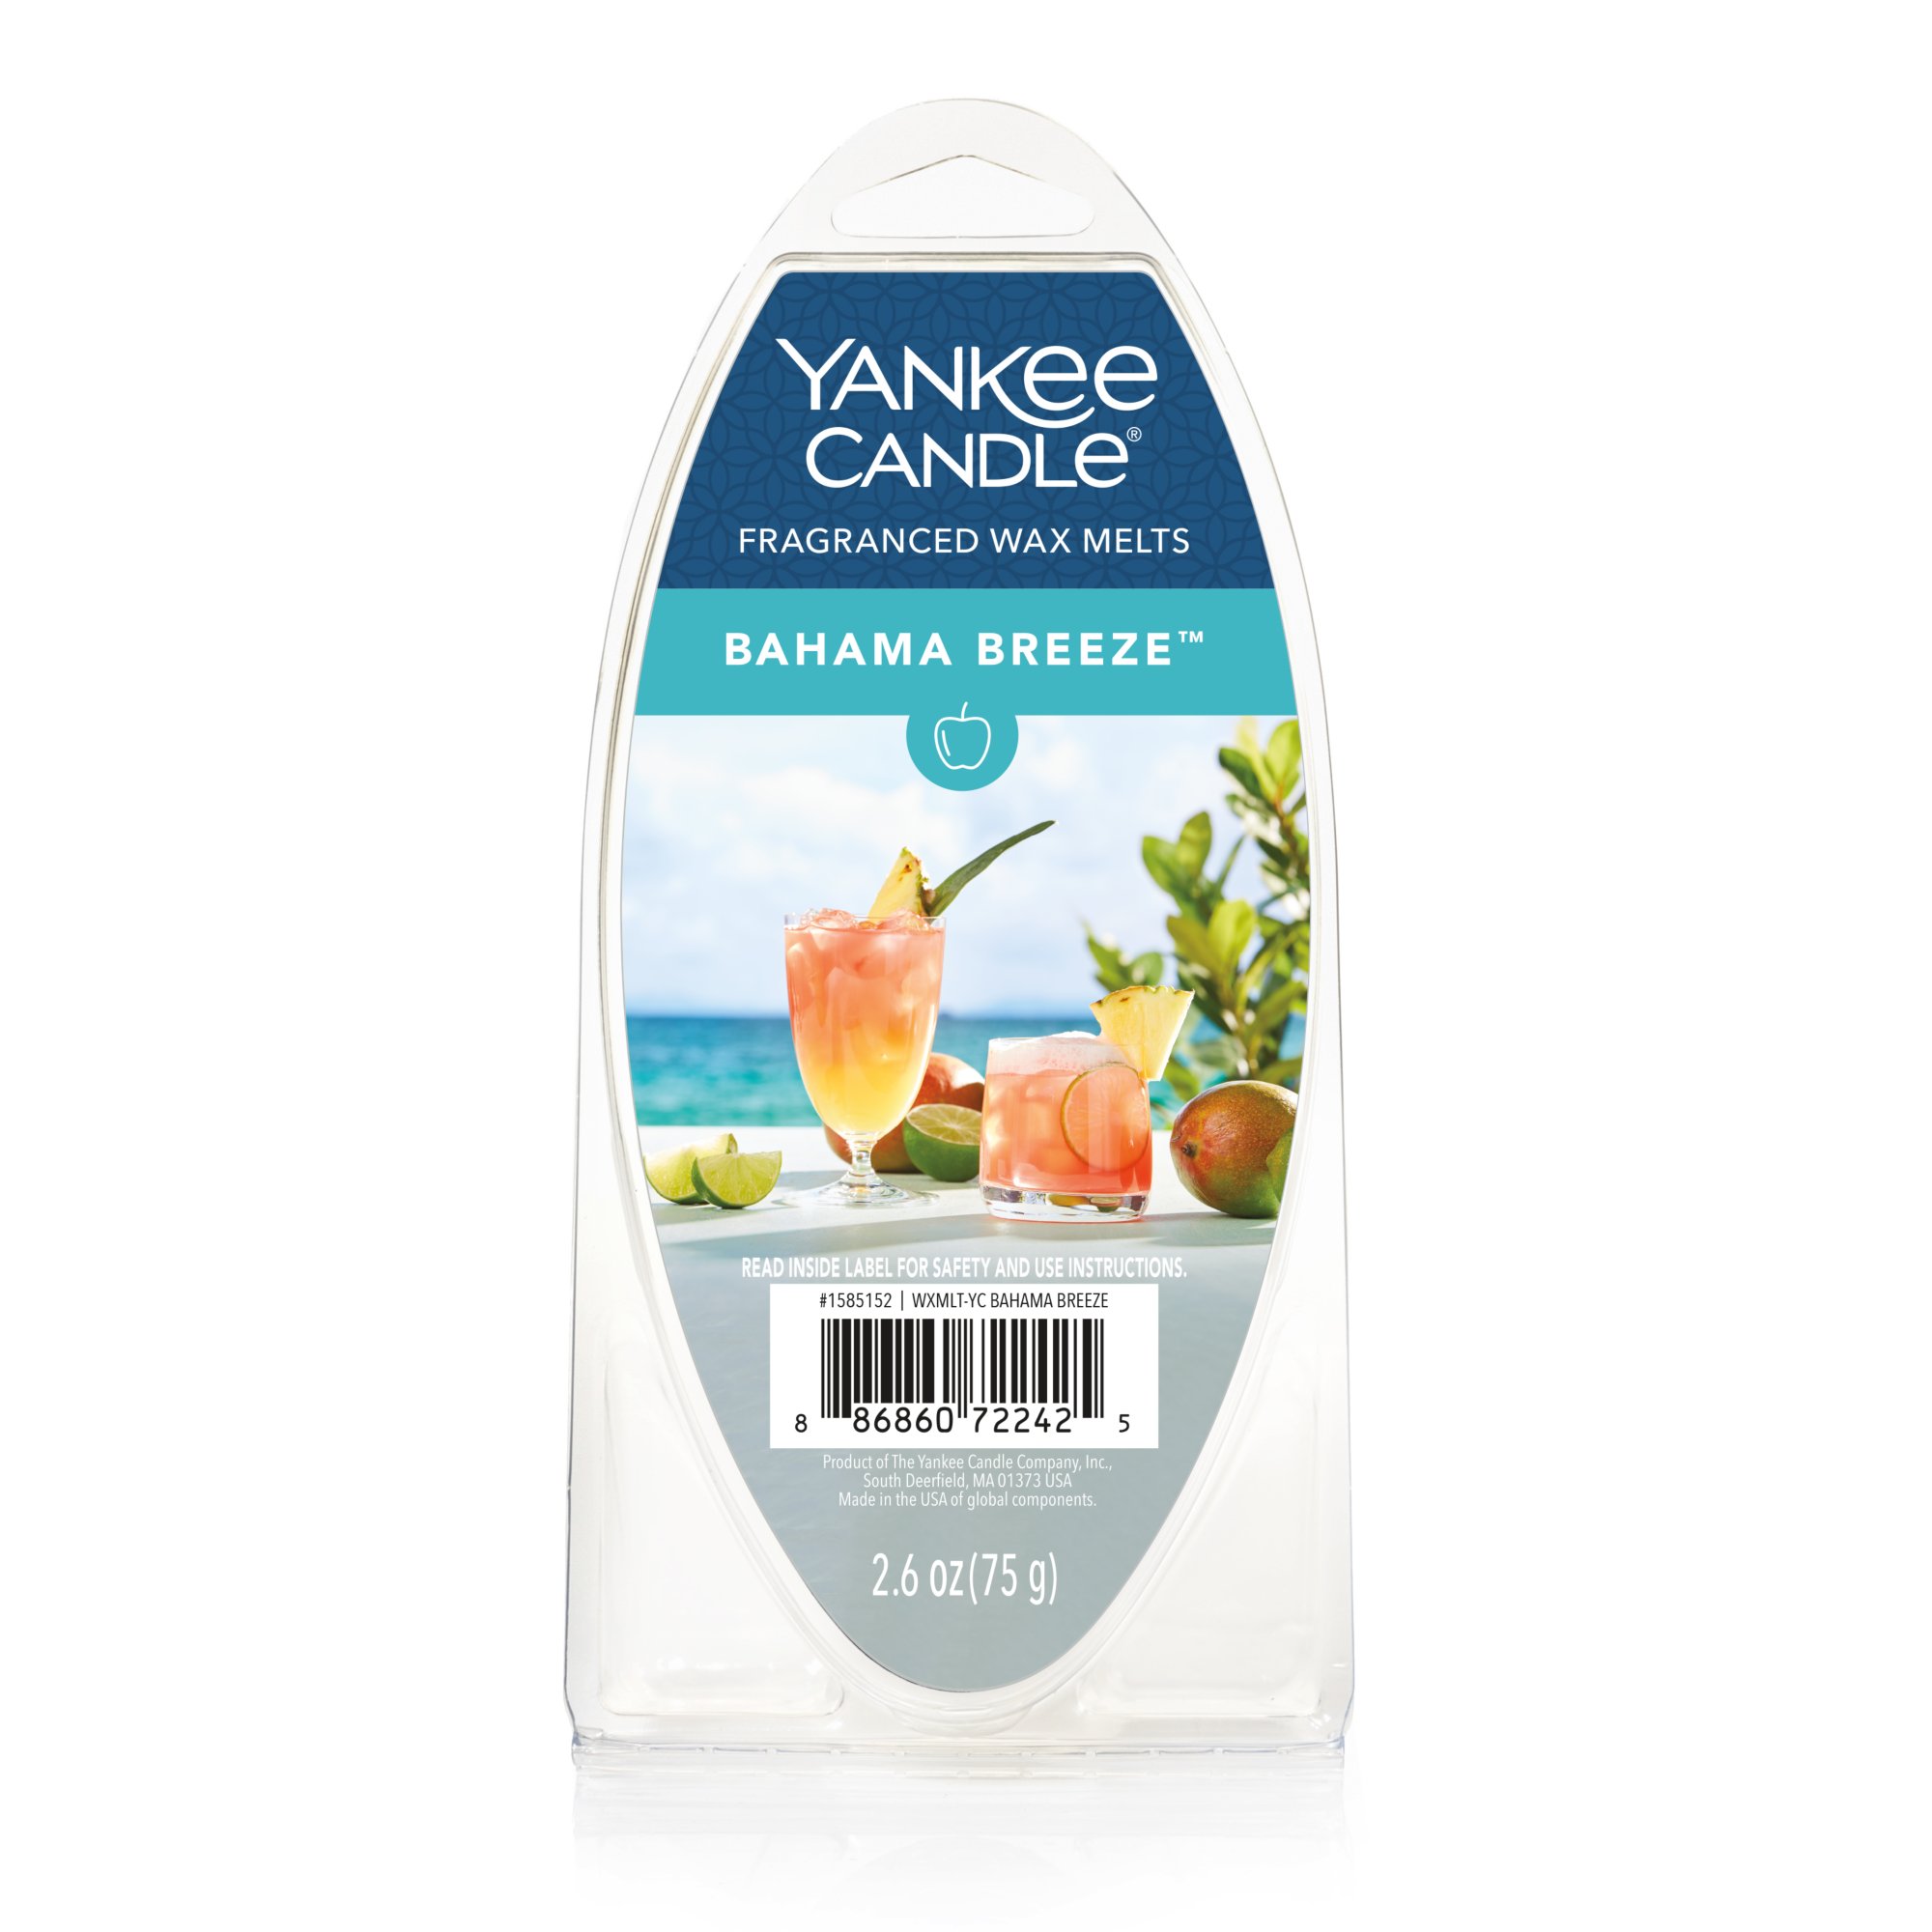 How to use Yankee Candle Wax Melts and Melt Warmer? 